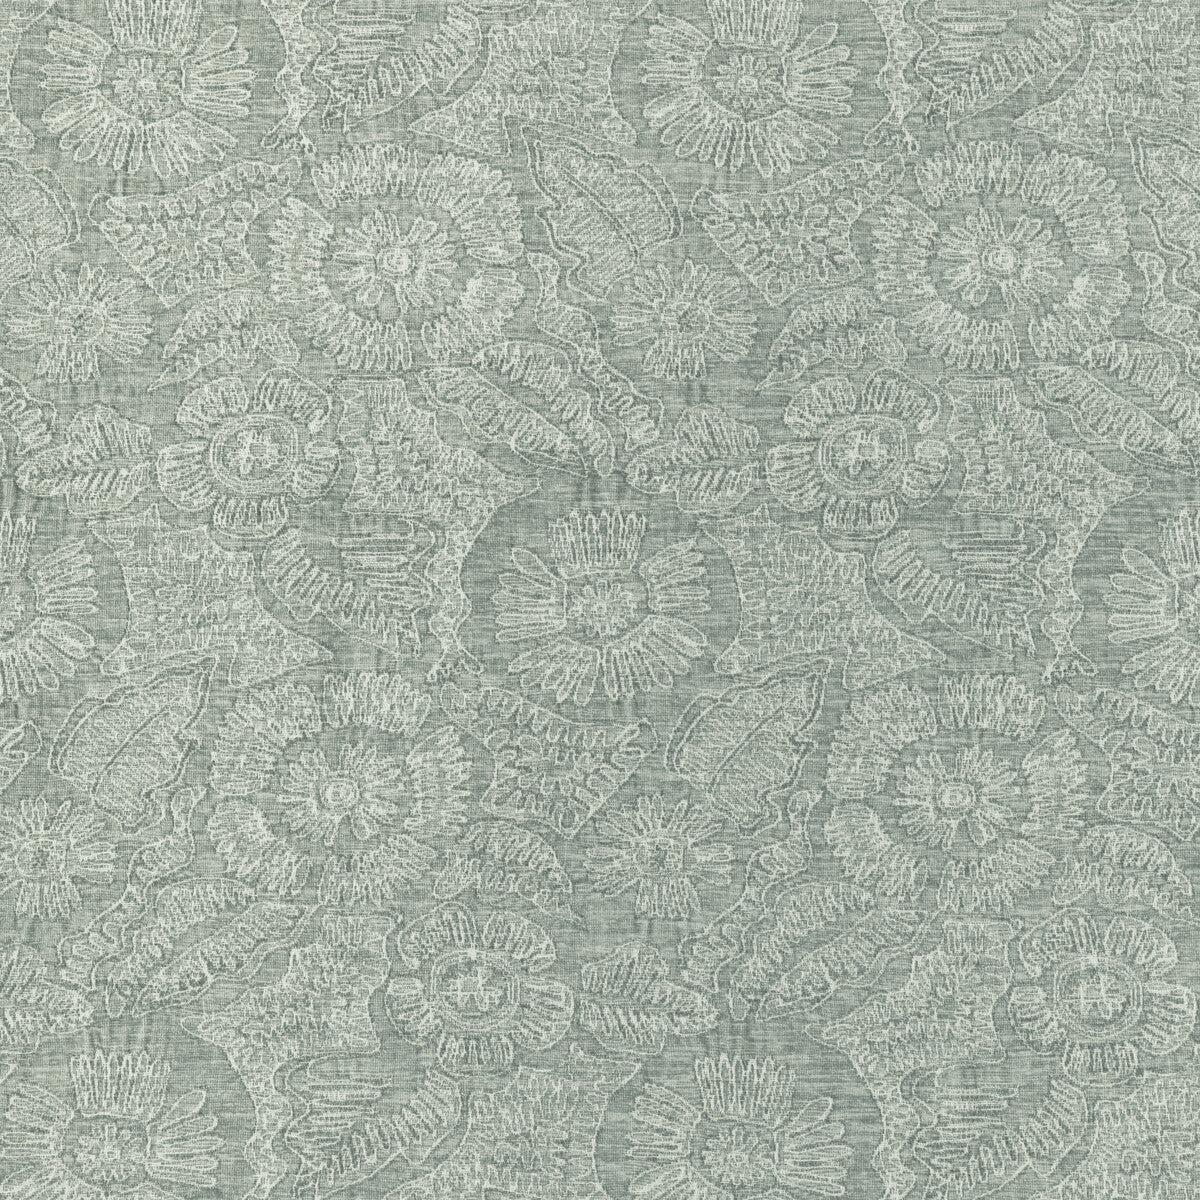 Chenille Bloom fabric in seaglass color - pattern 36889.135.0 - by Kravet Couture in the Atelier Weaves collection